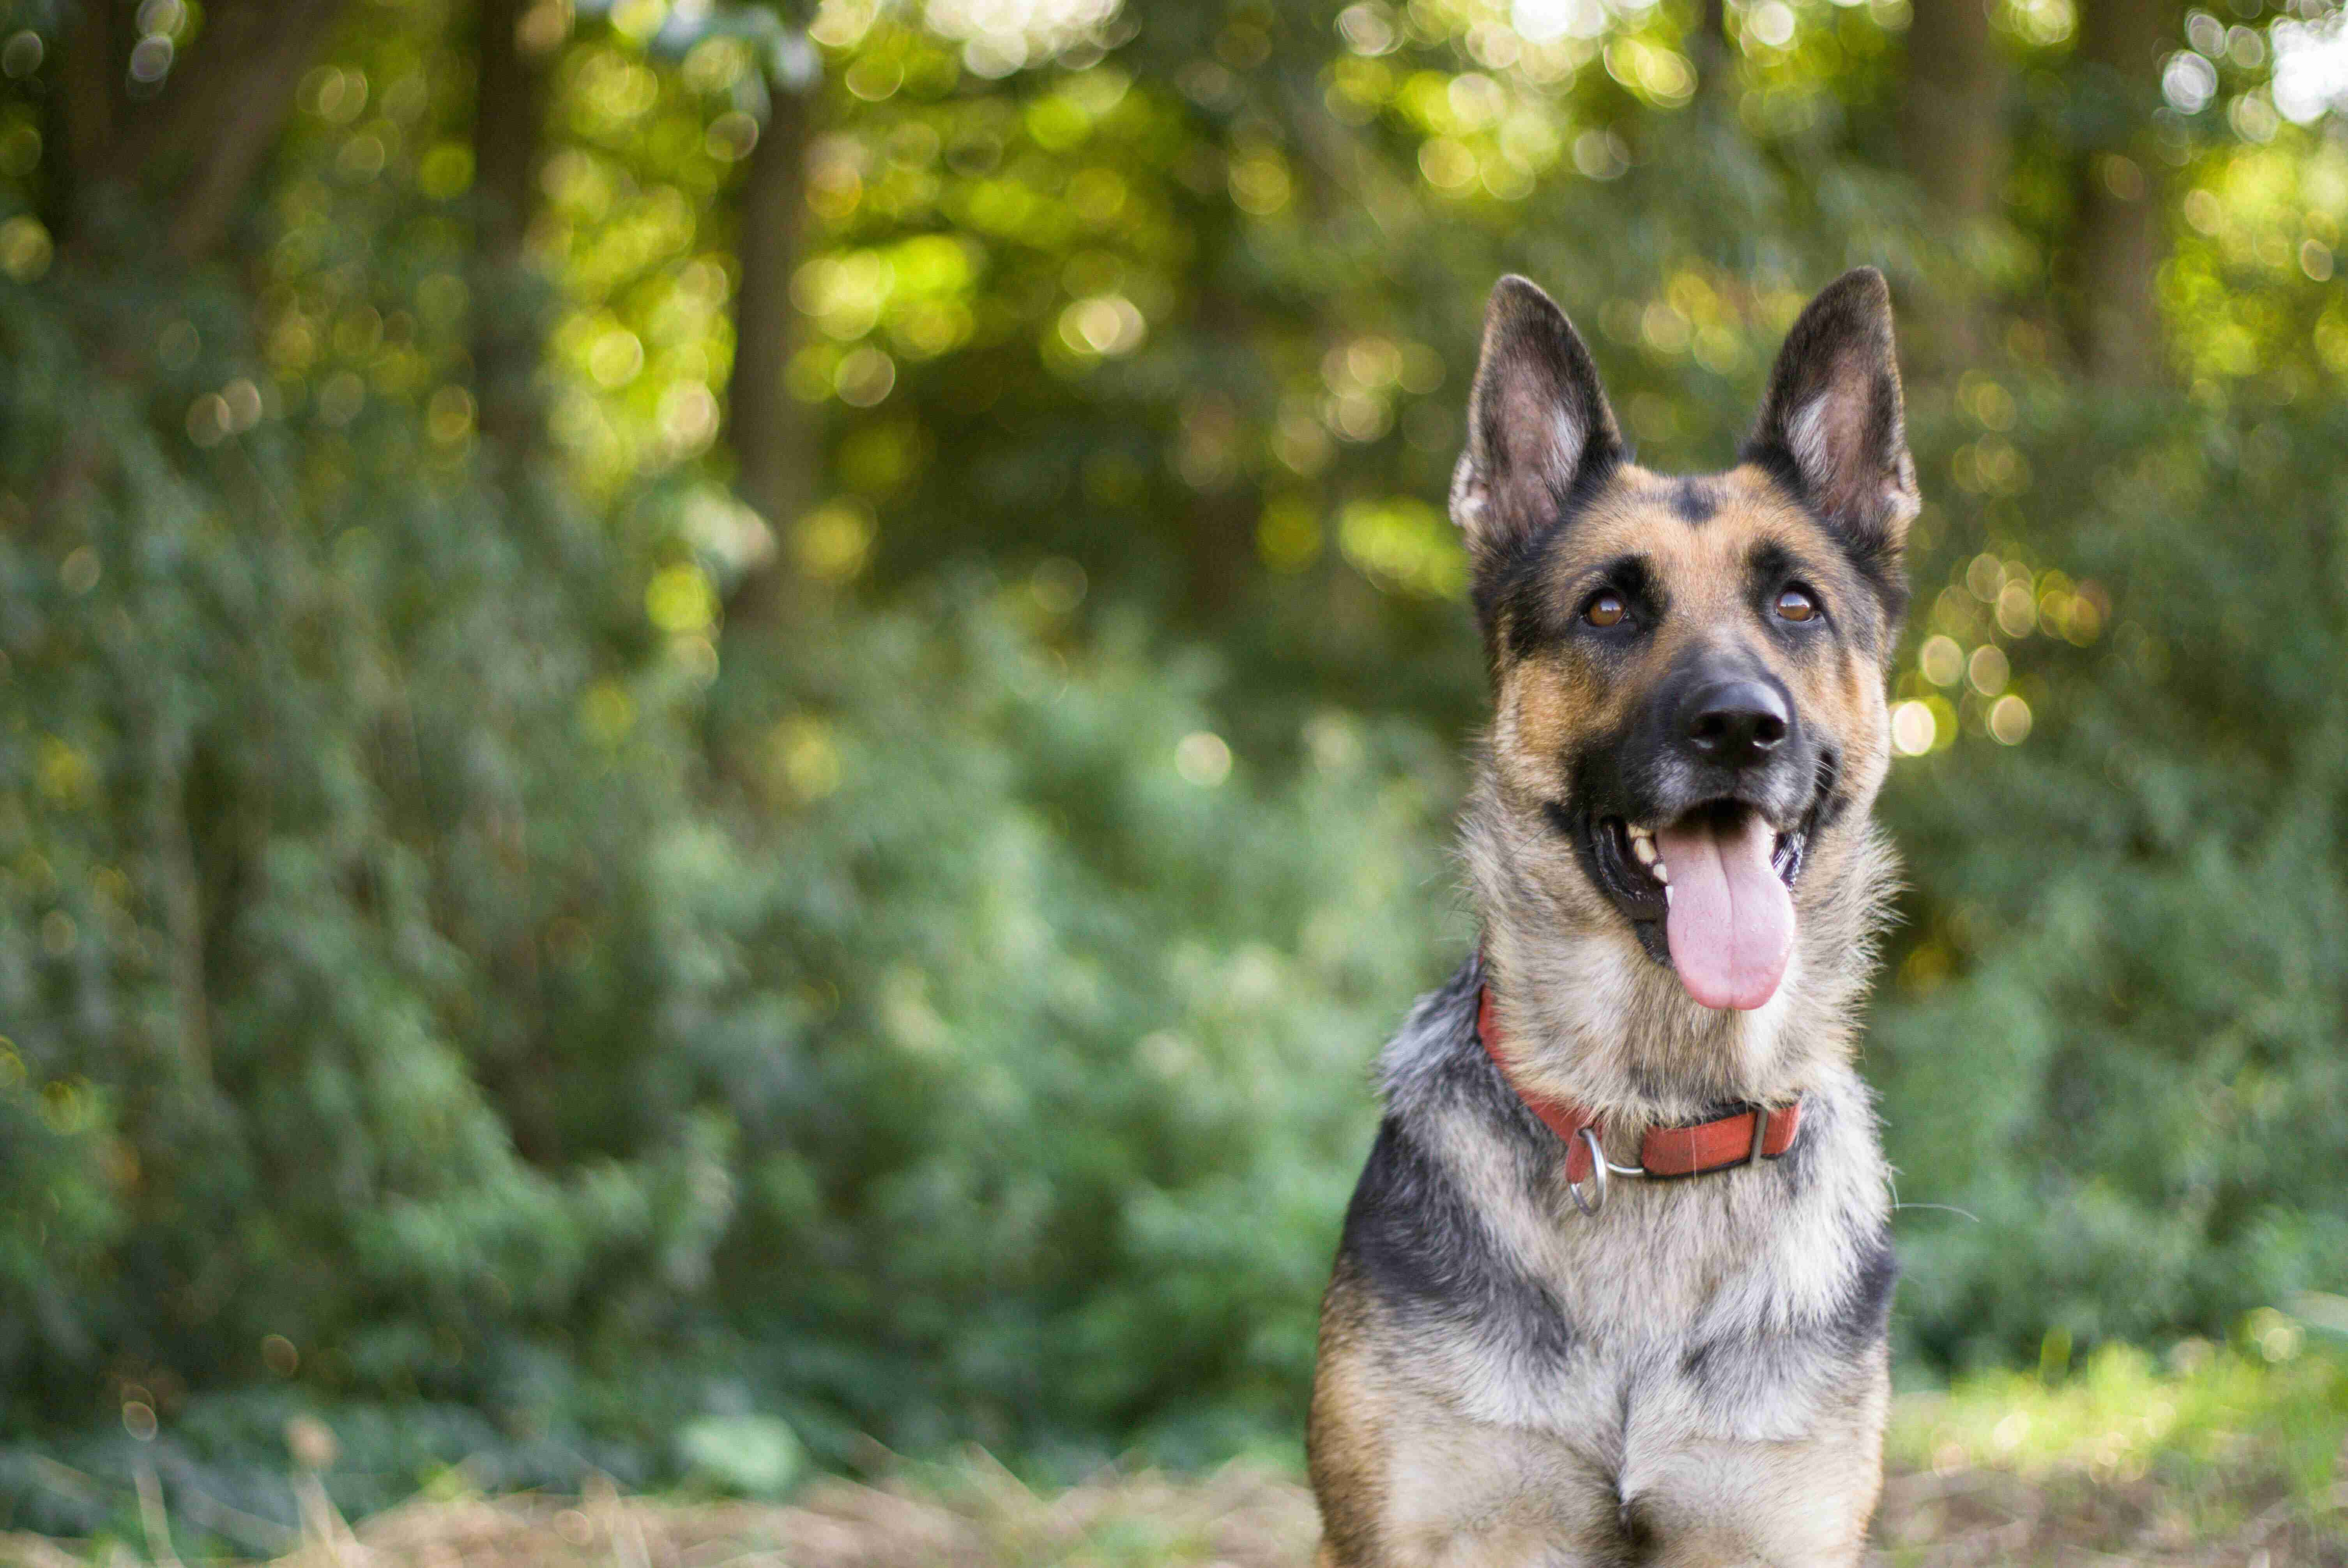 What is the best way to introduce a German shepherd to a new household?